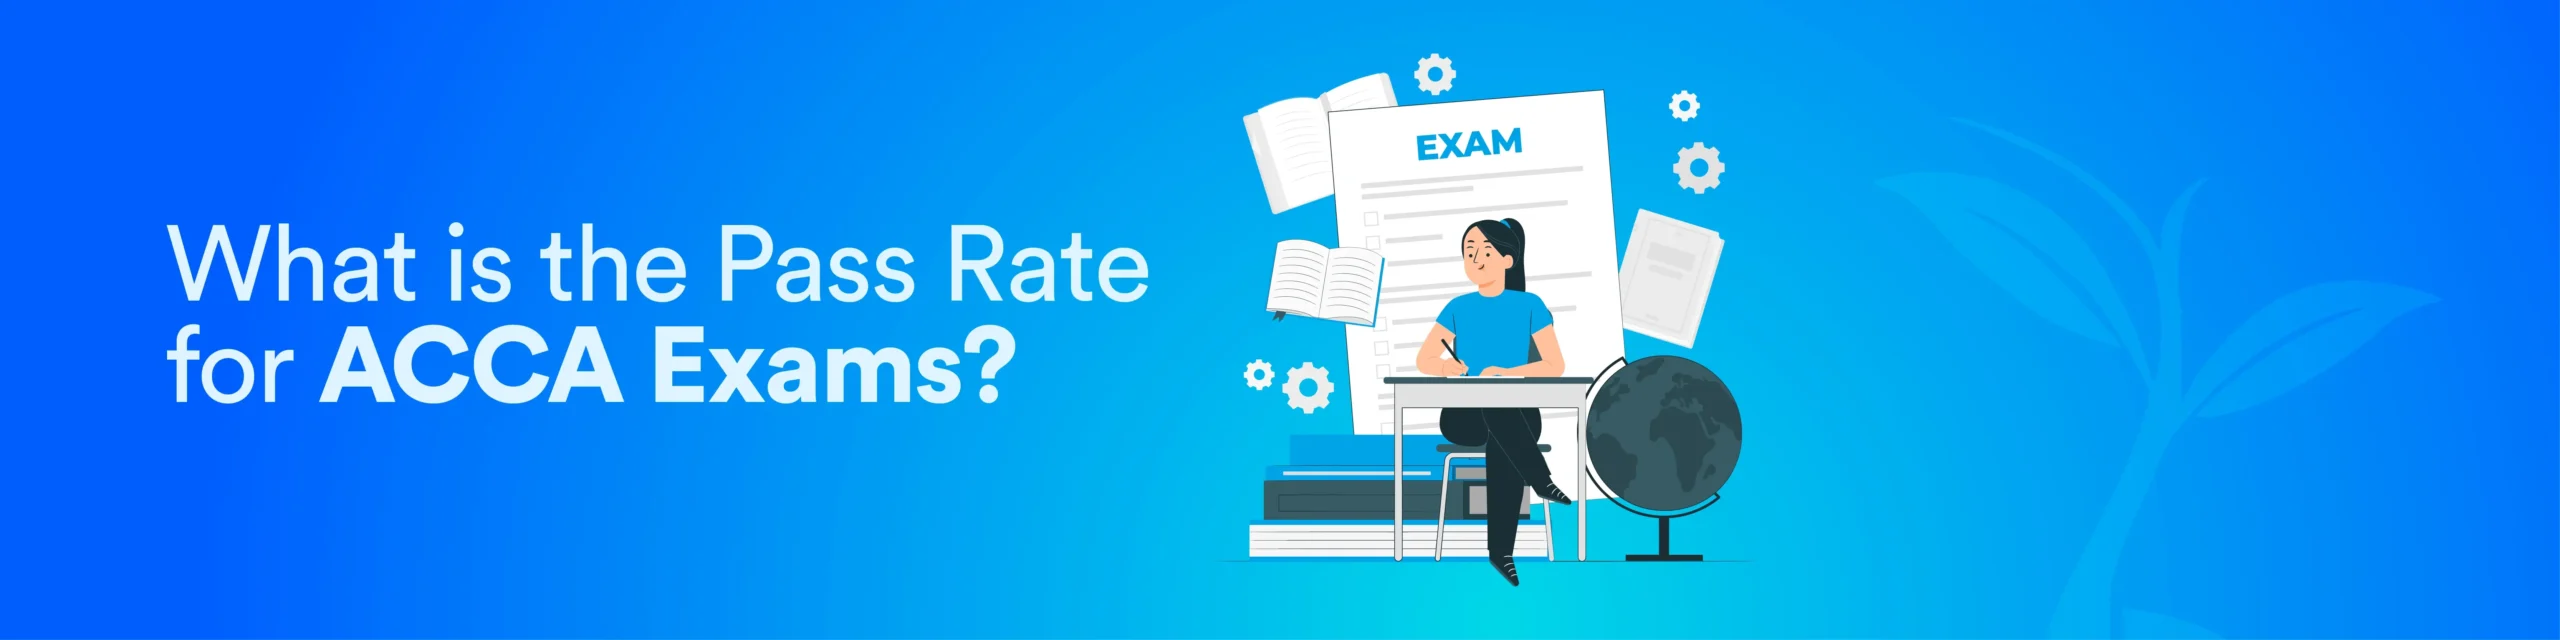 Pass Rates for ACCA Exams